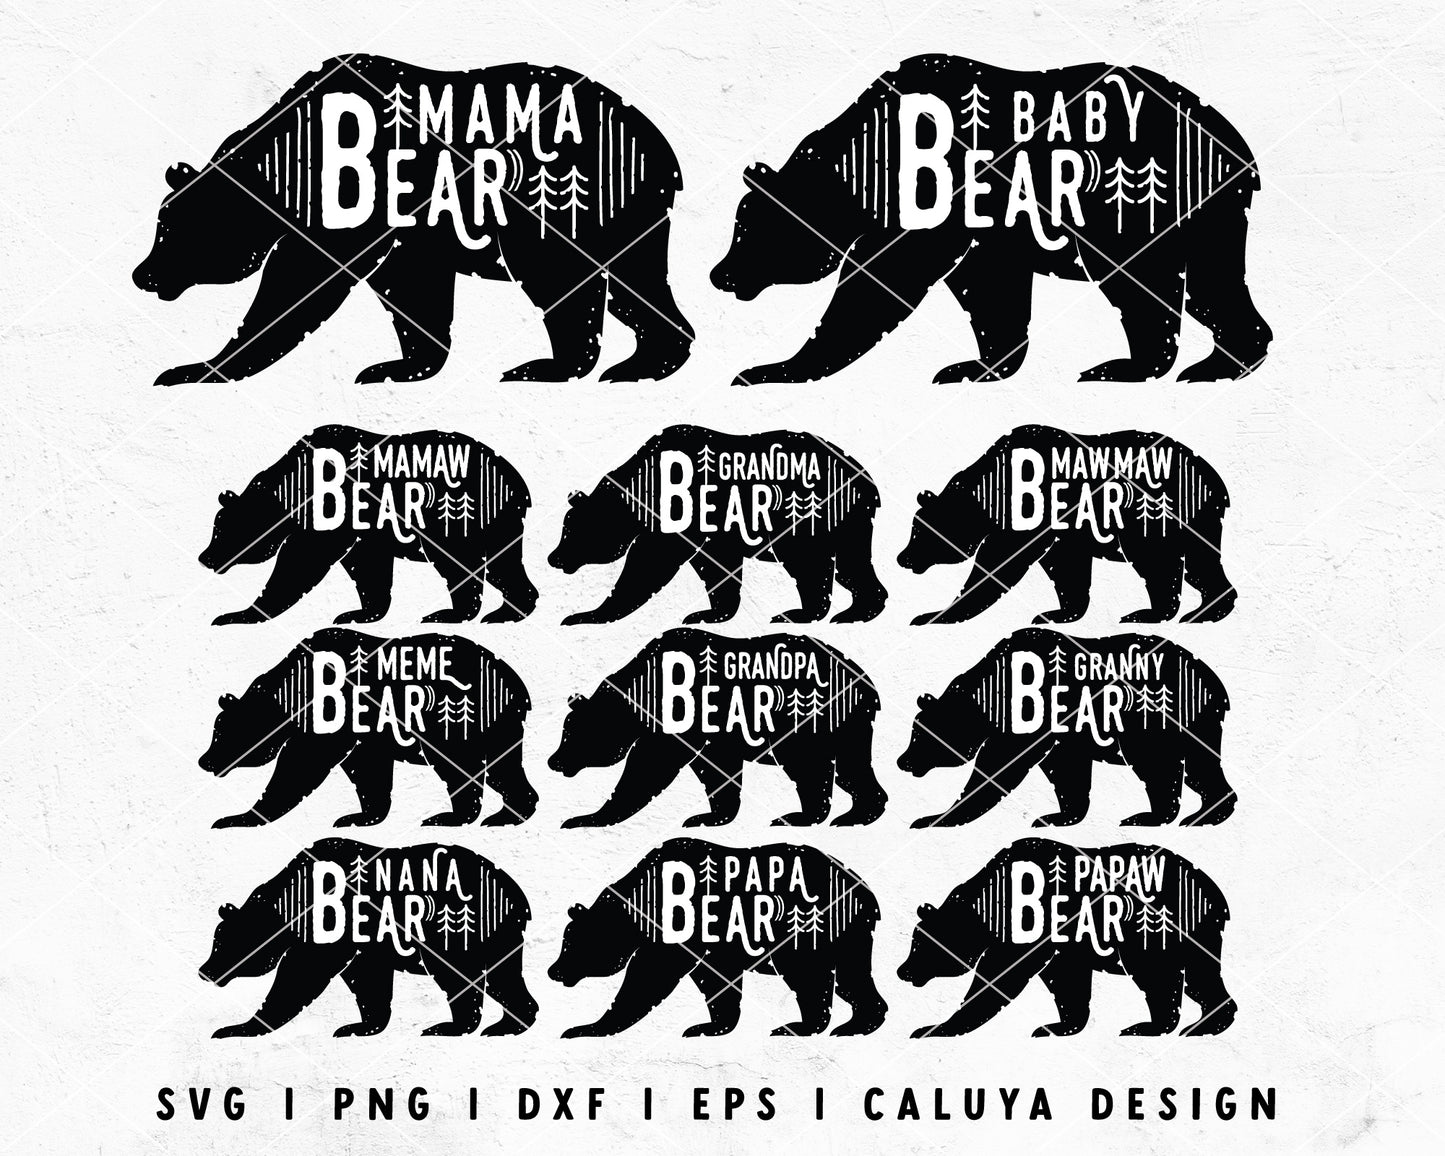 FREE Vintage Bear SVG | Forest Animal SVG Cut File for Cricut, Cameo Silhouette | Free SVG Cut File